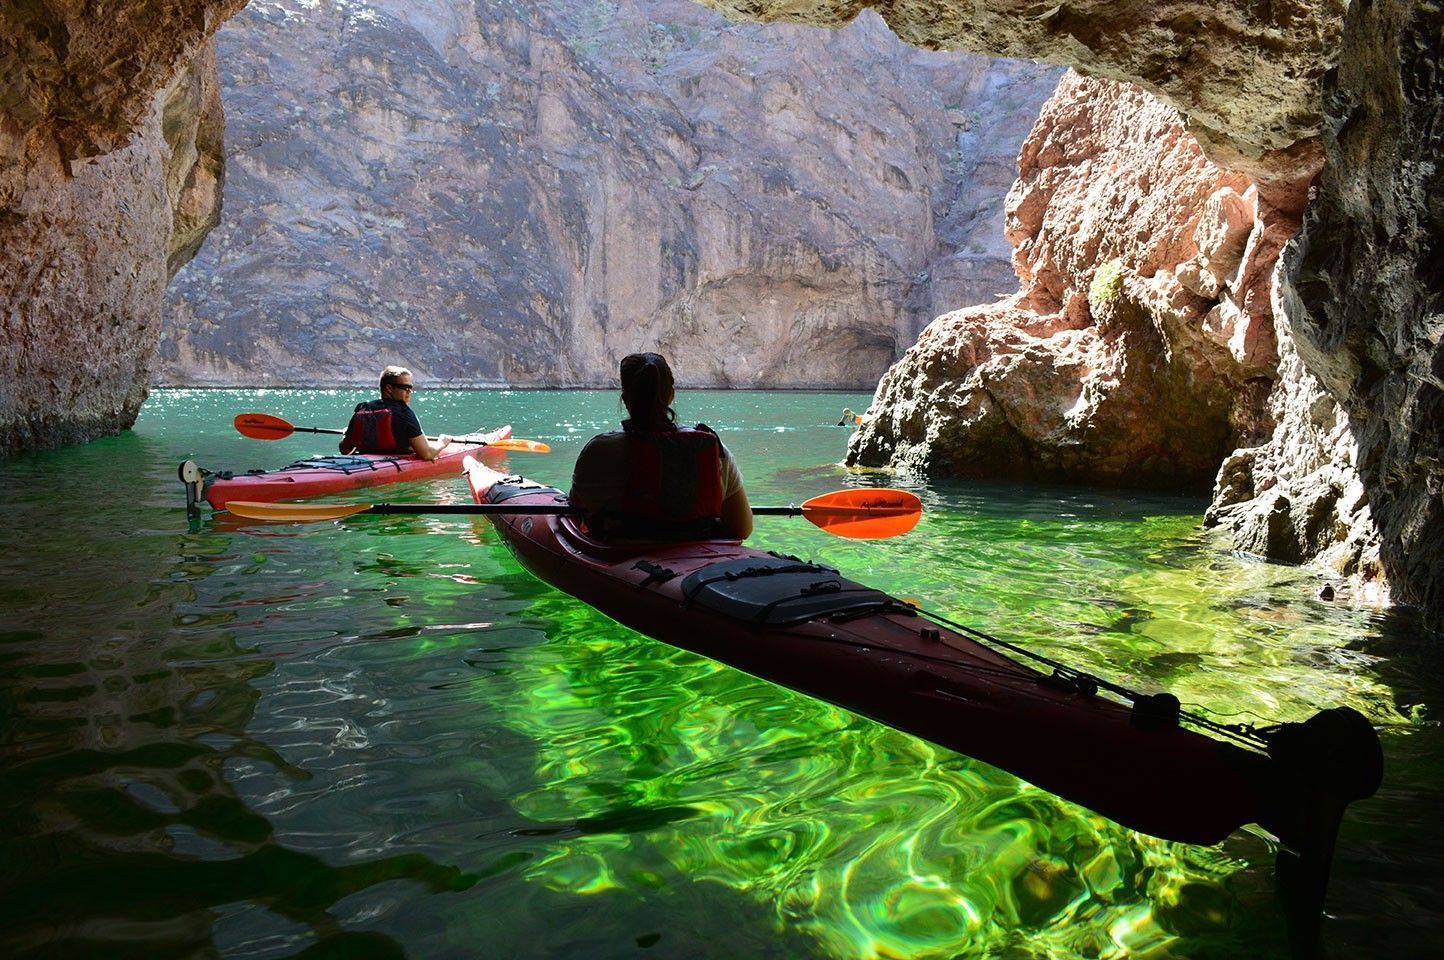 People kayaking under a rock formation